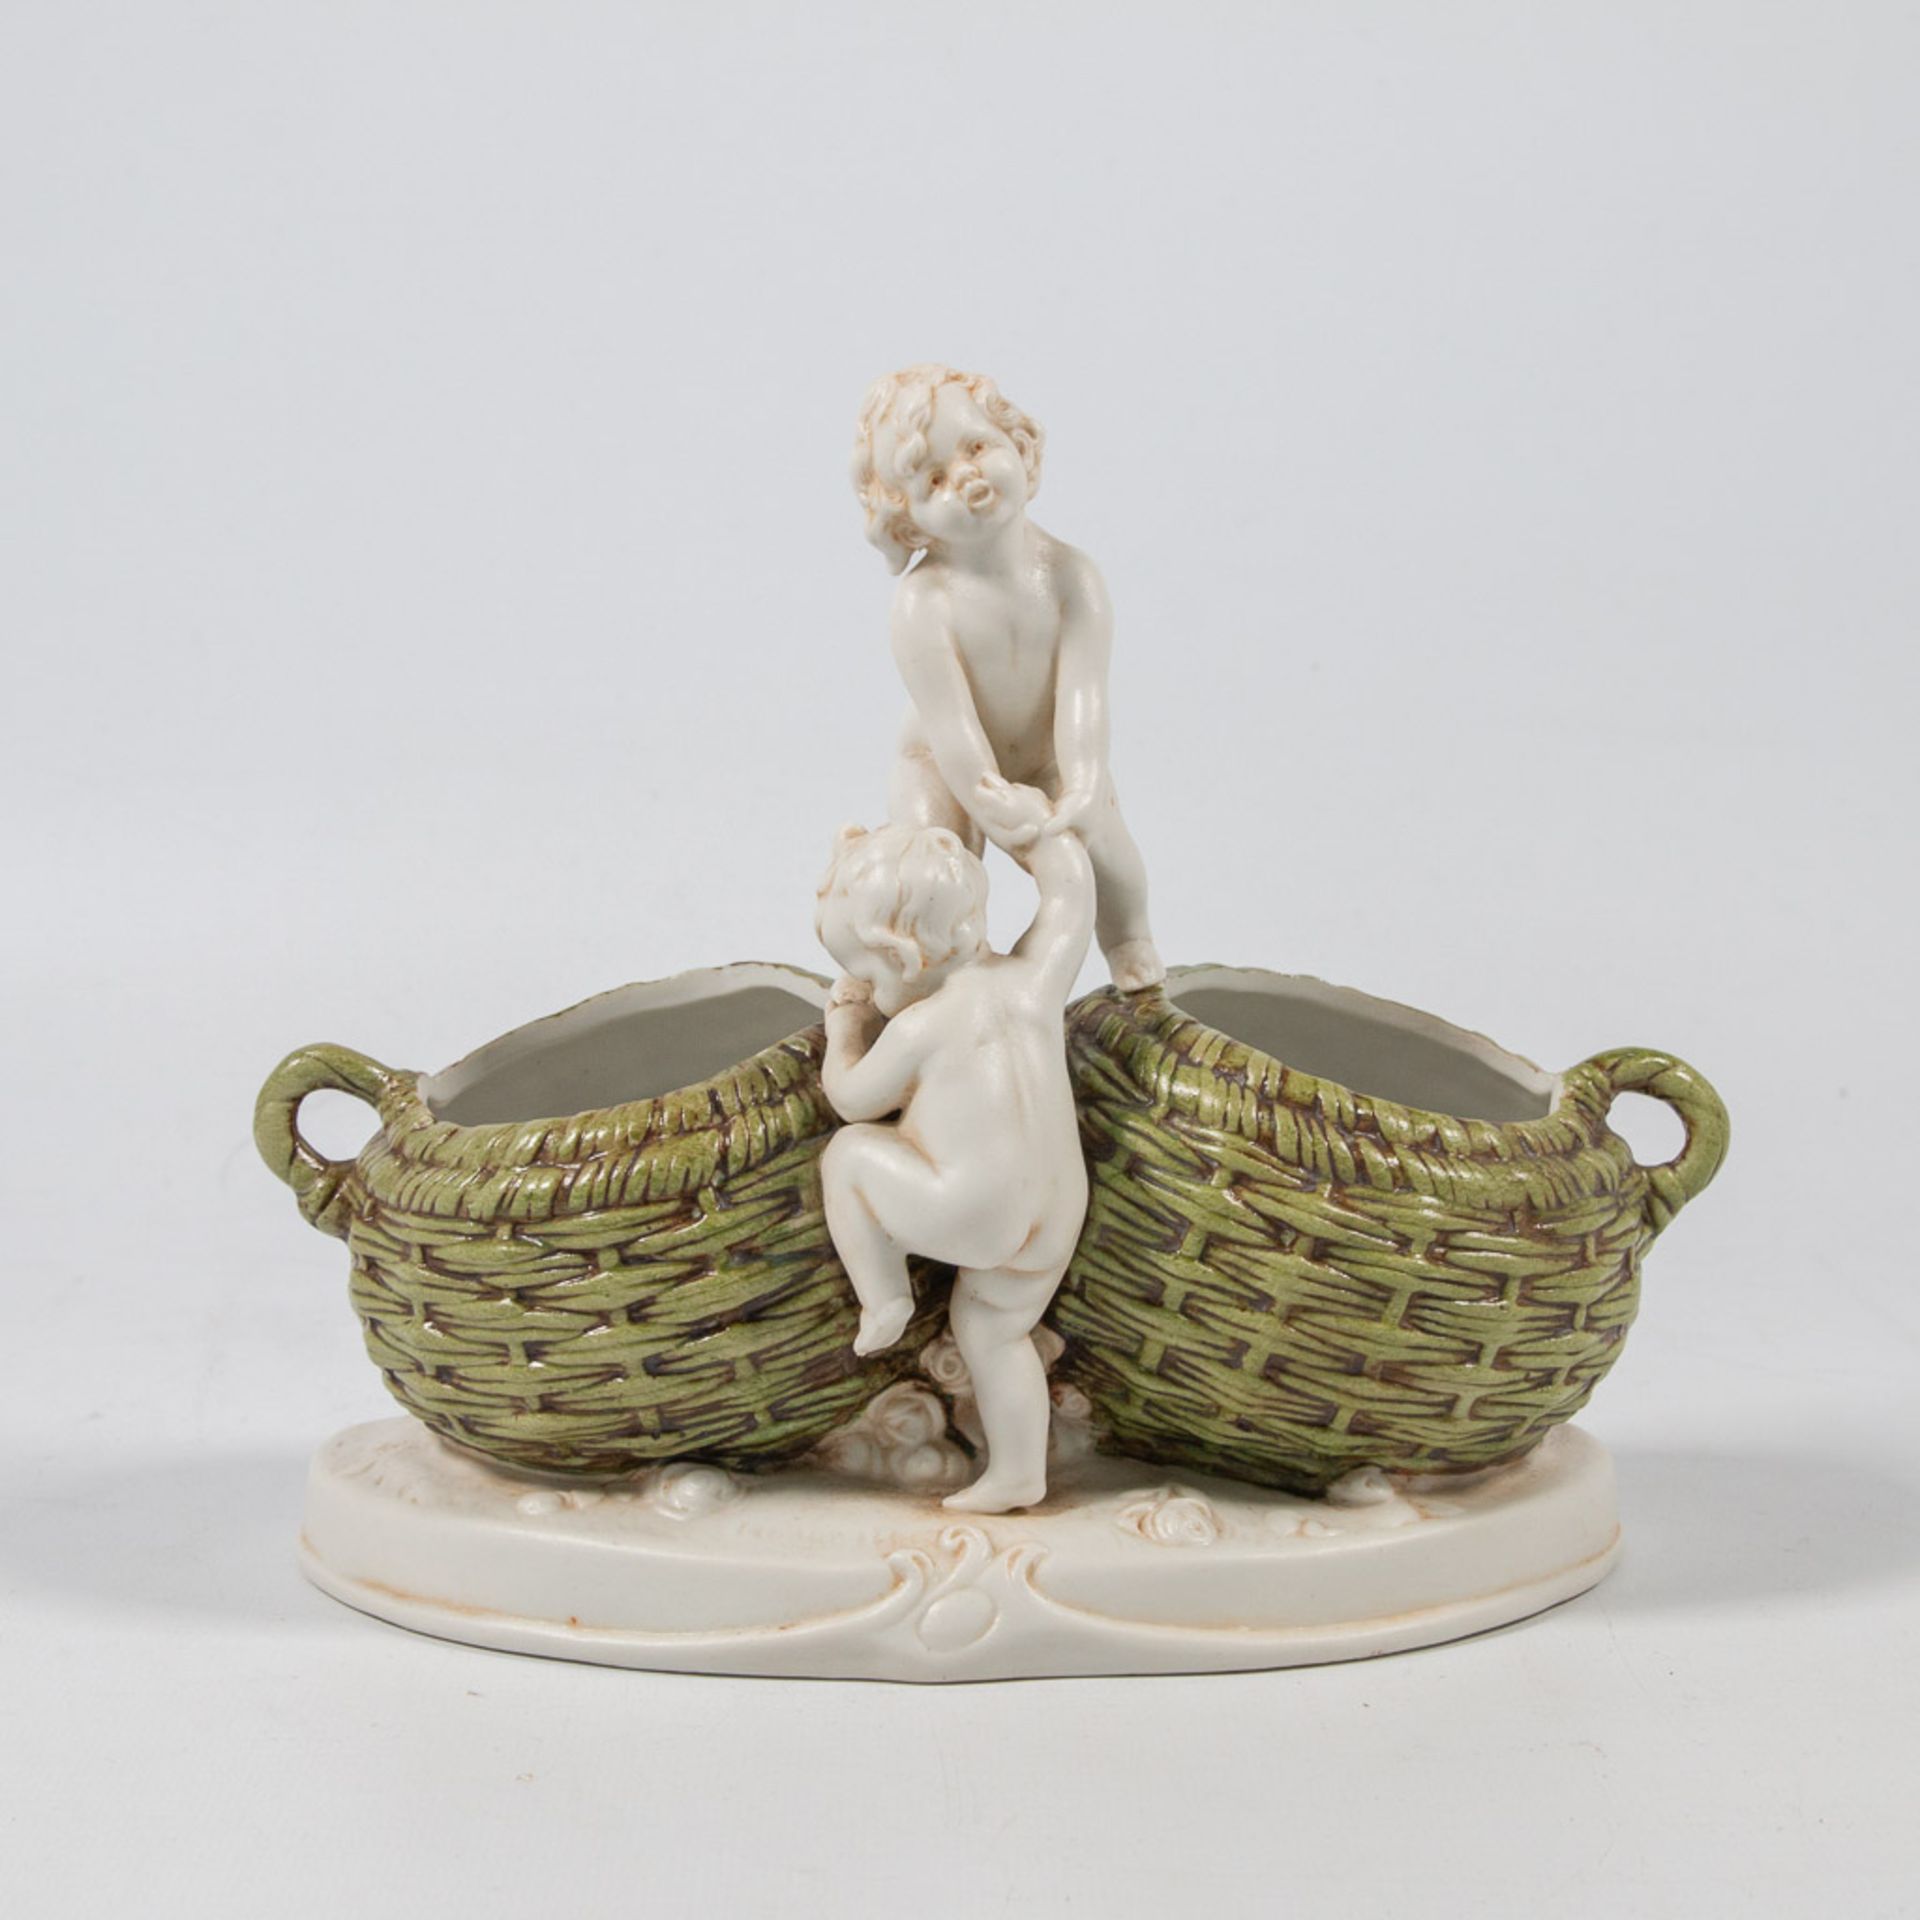 Hertwig and Co, Katzhutte, porcelain group of 2 putti